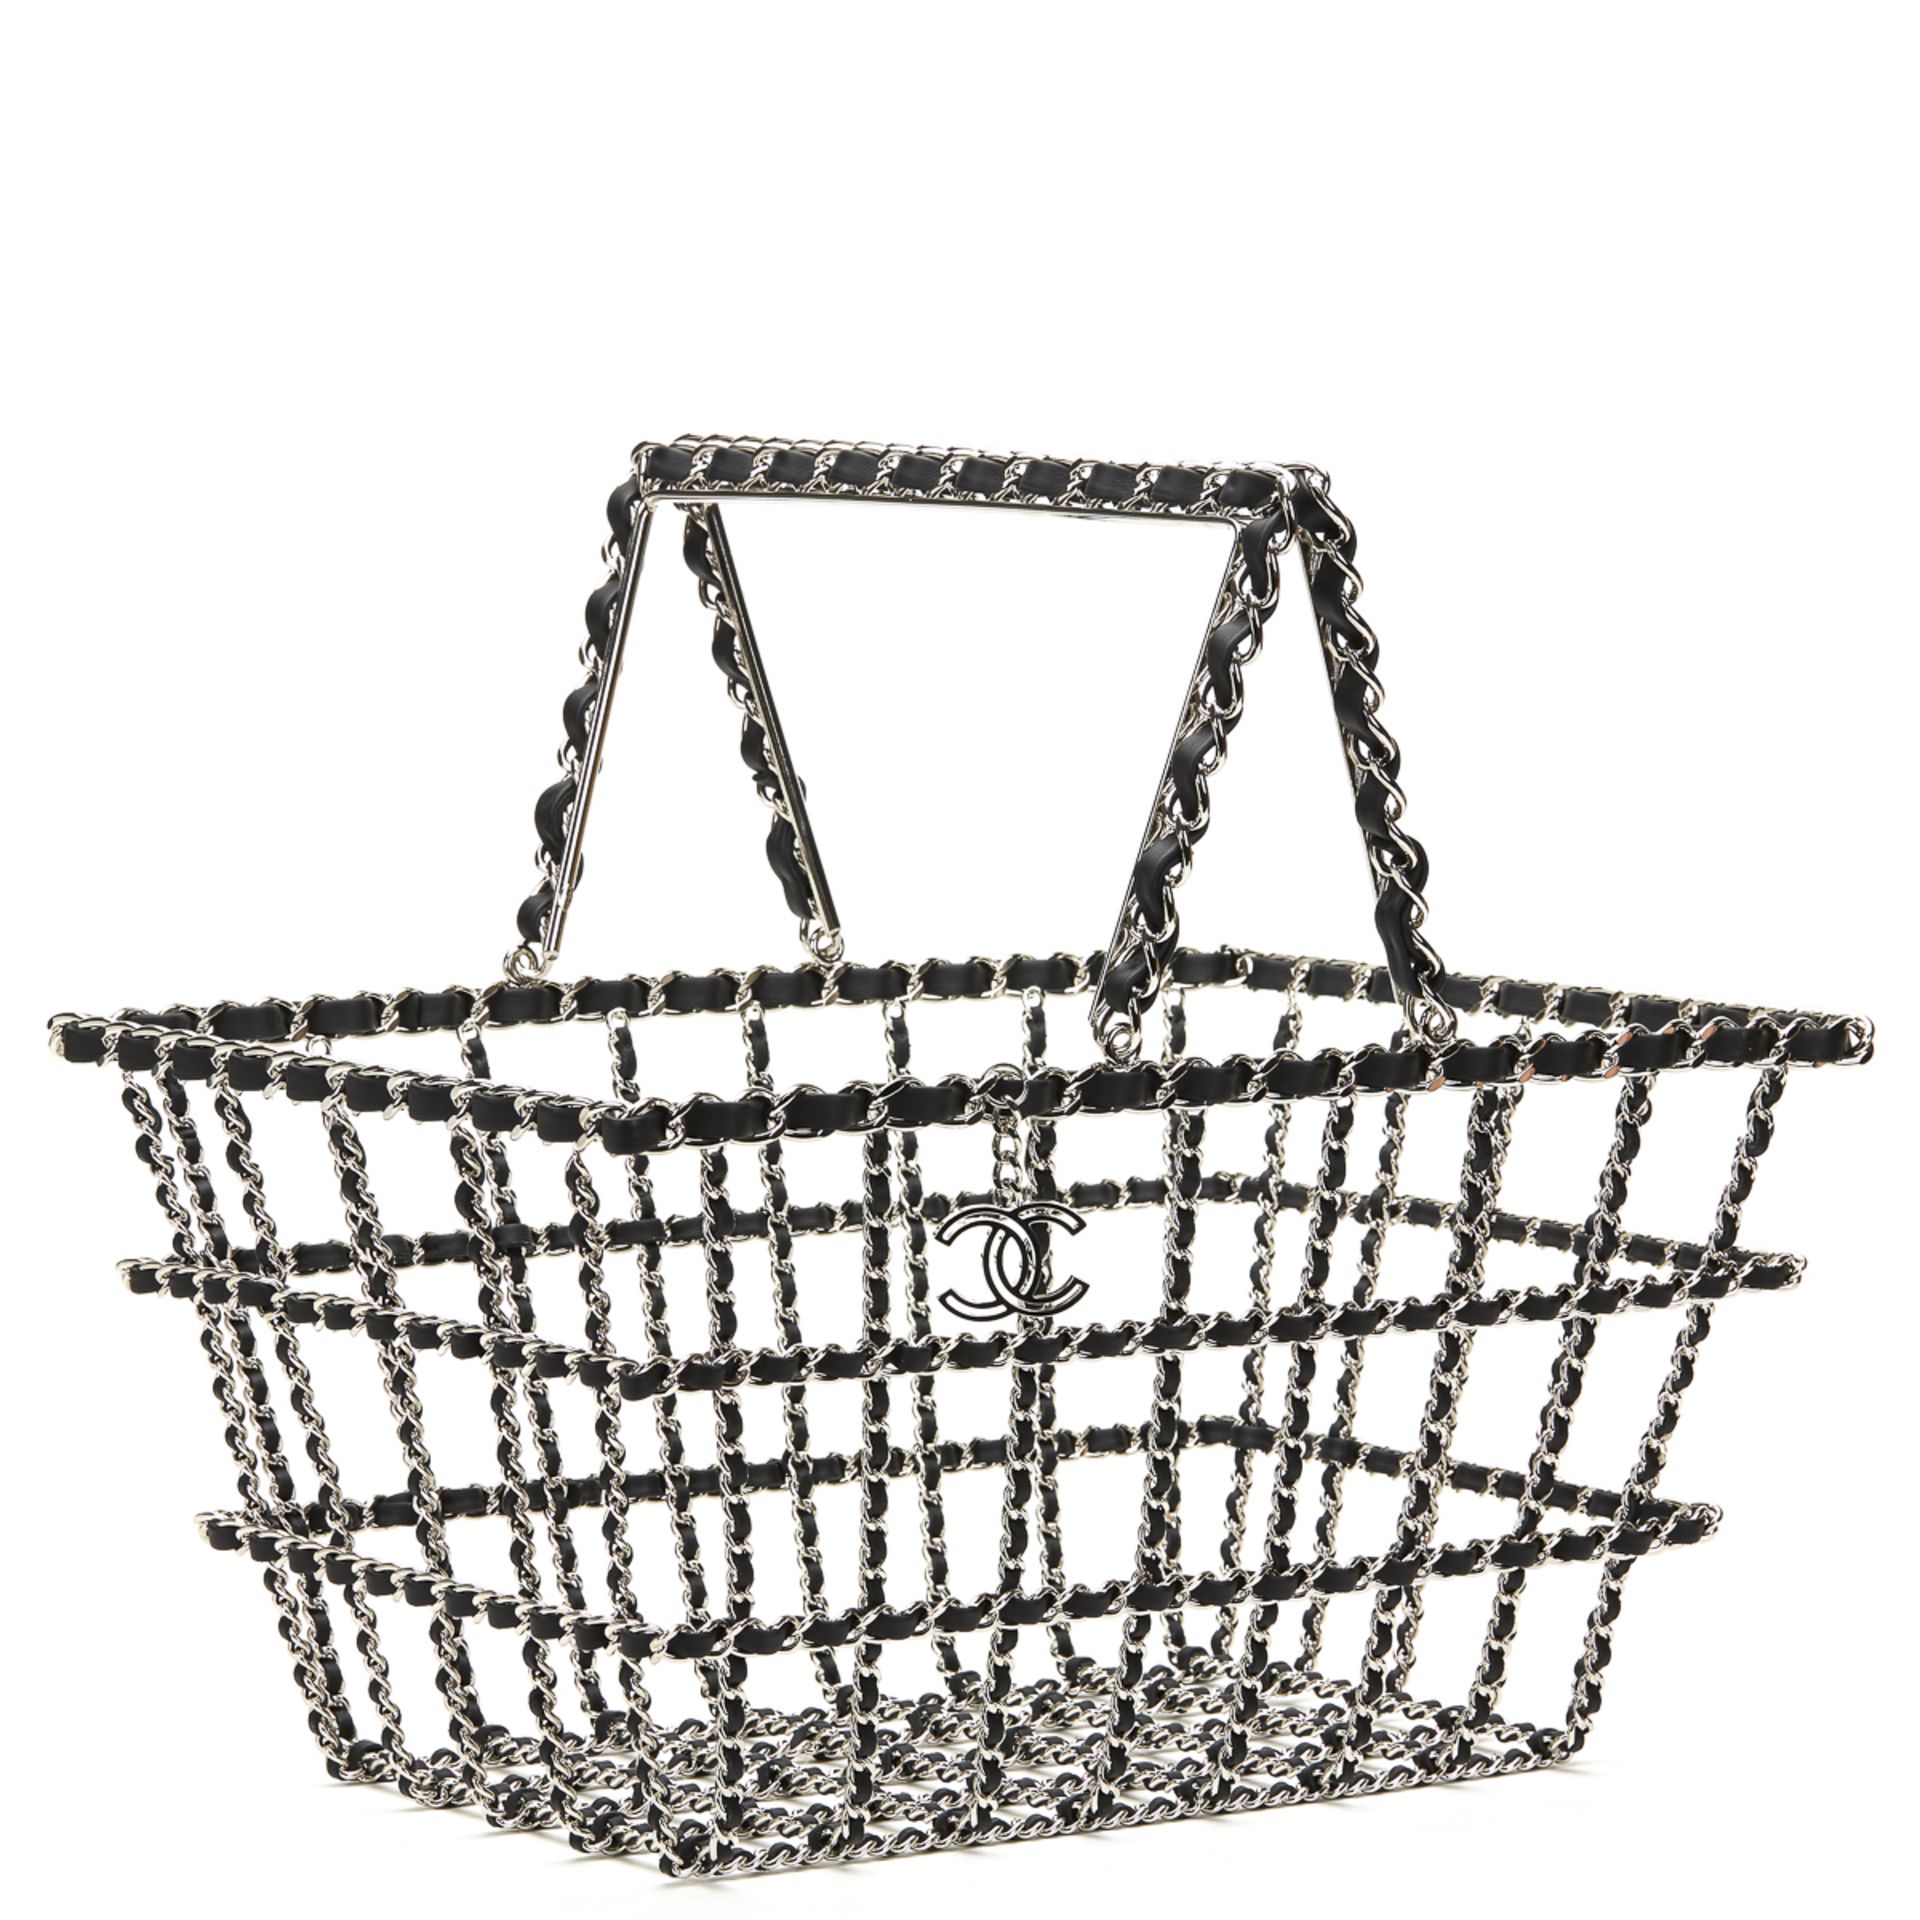 Silver & Black Calfskin Leather Fall 2014 Act 2 Basket Bag - Image 2 of 9